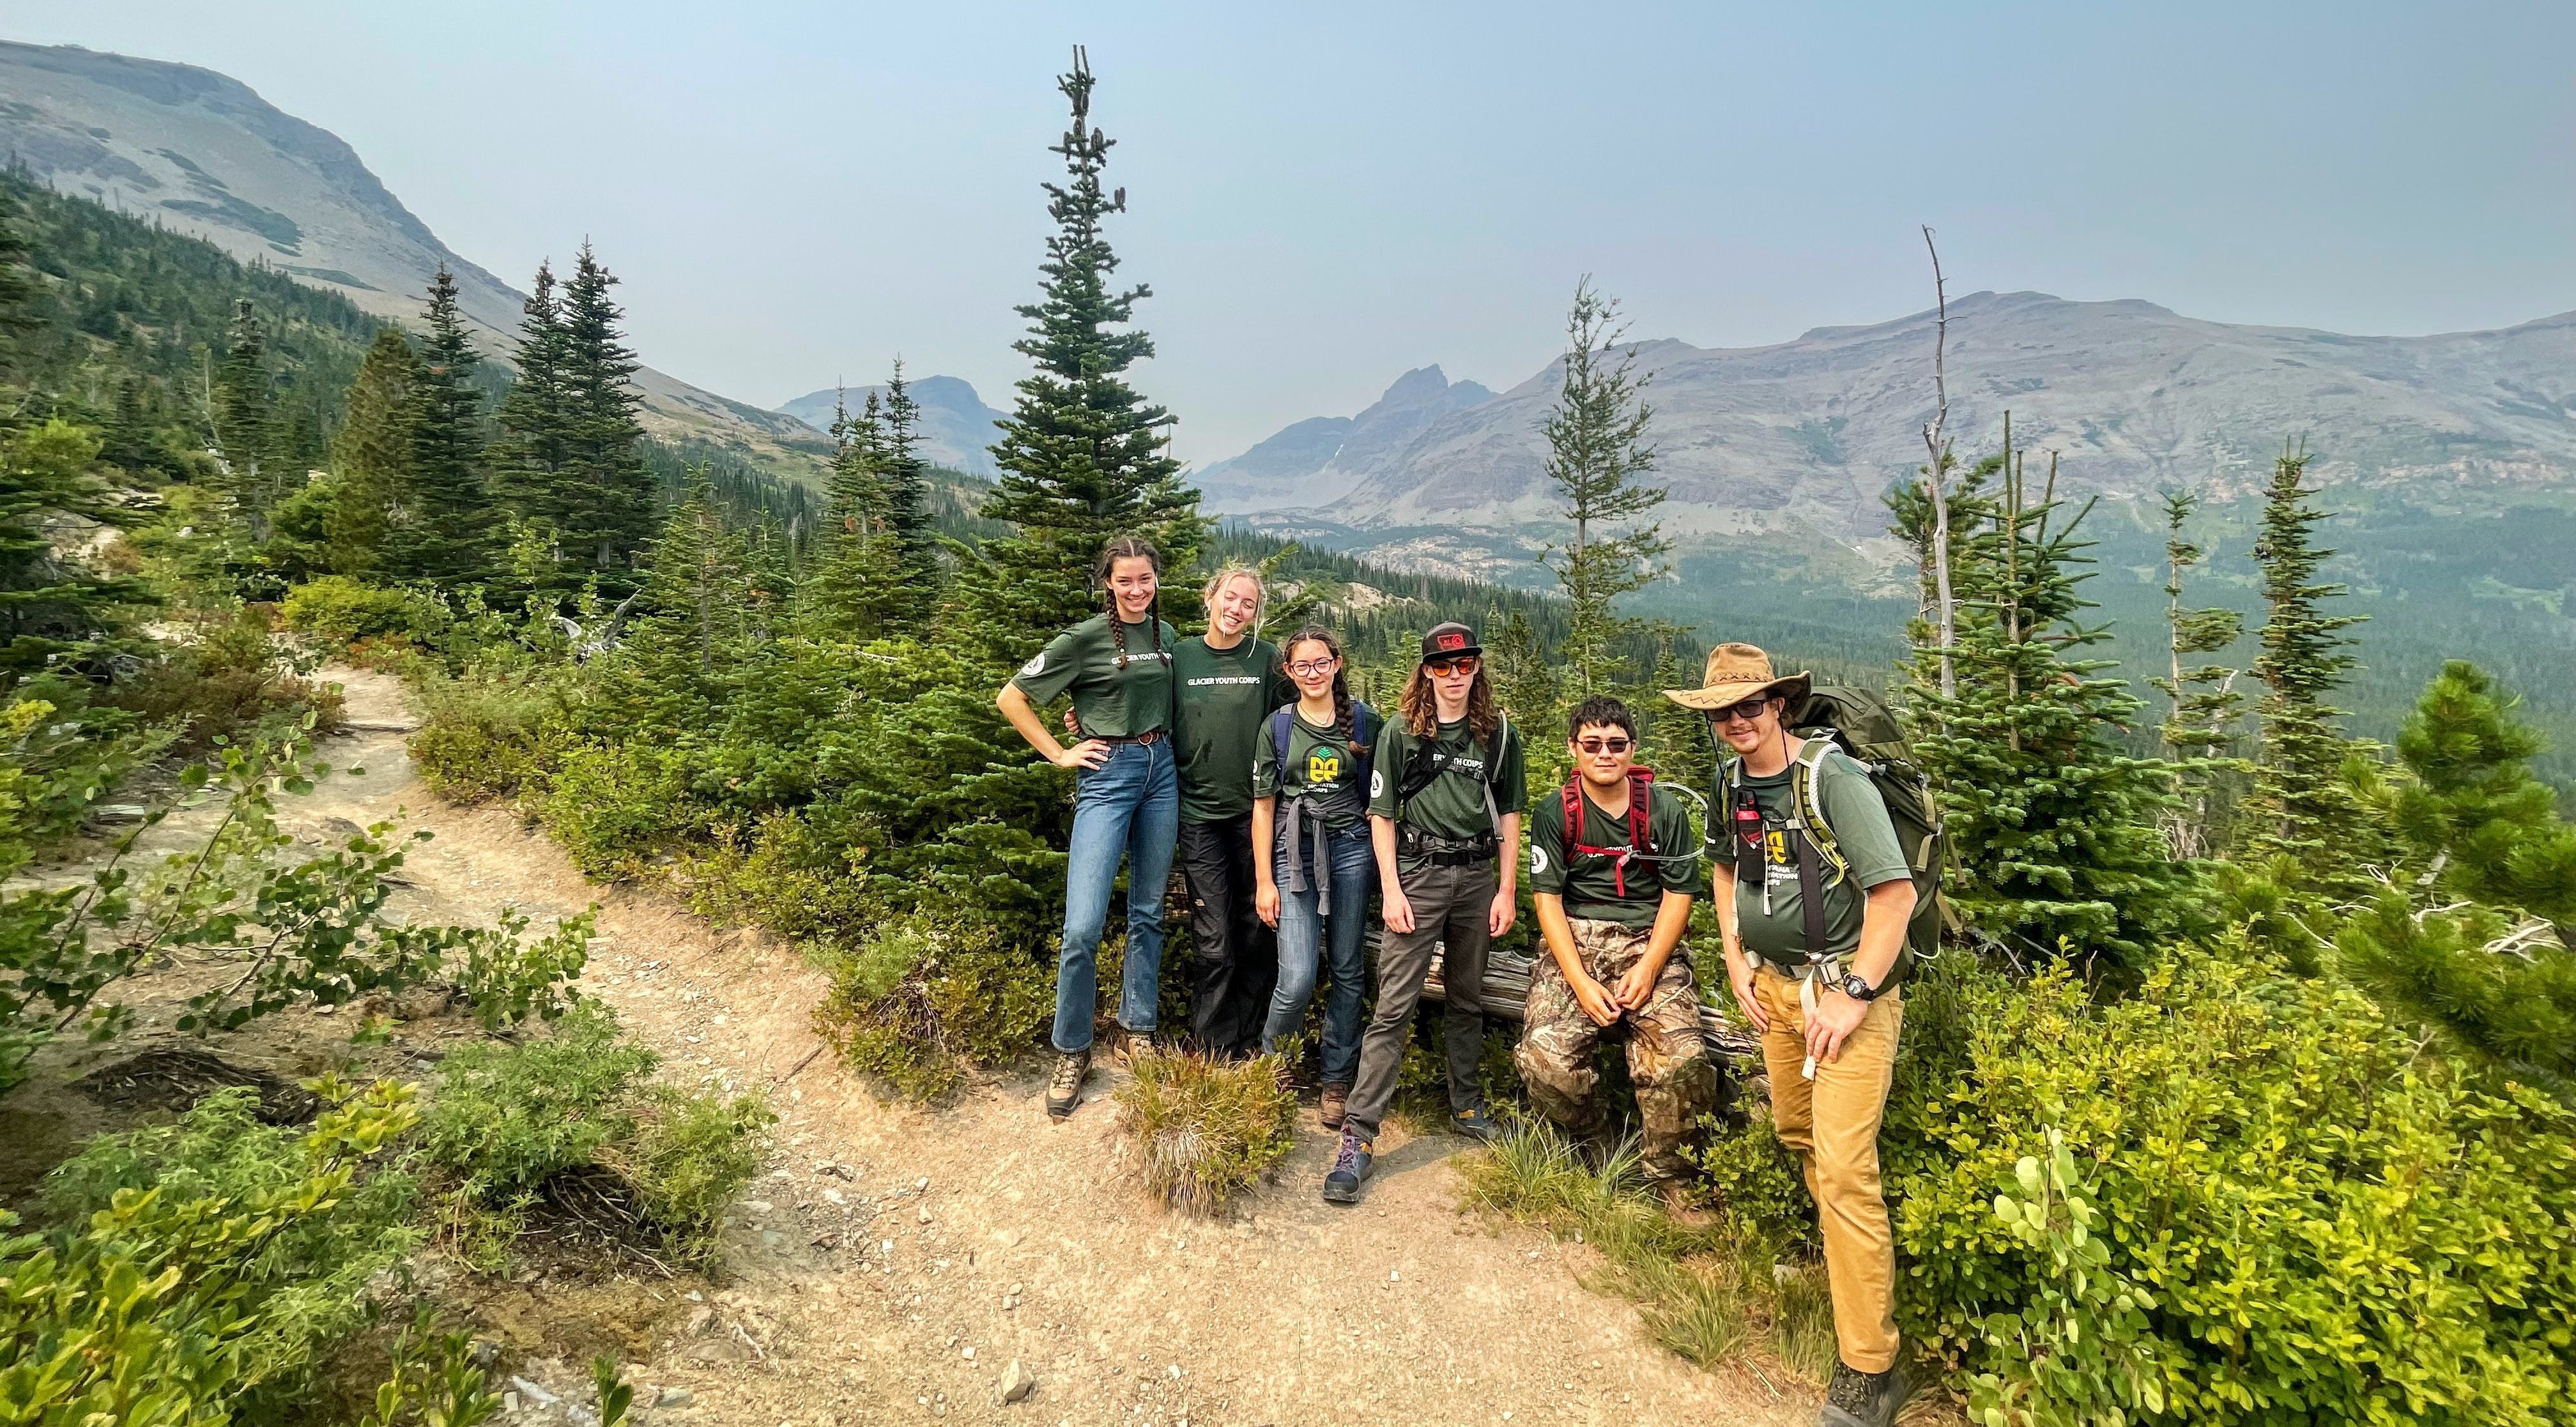 [Image Description: Six MCC members standing together on a trail, overlooking a mountainous landscape, surrounded by green shrubs and pine trees.]